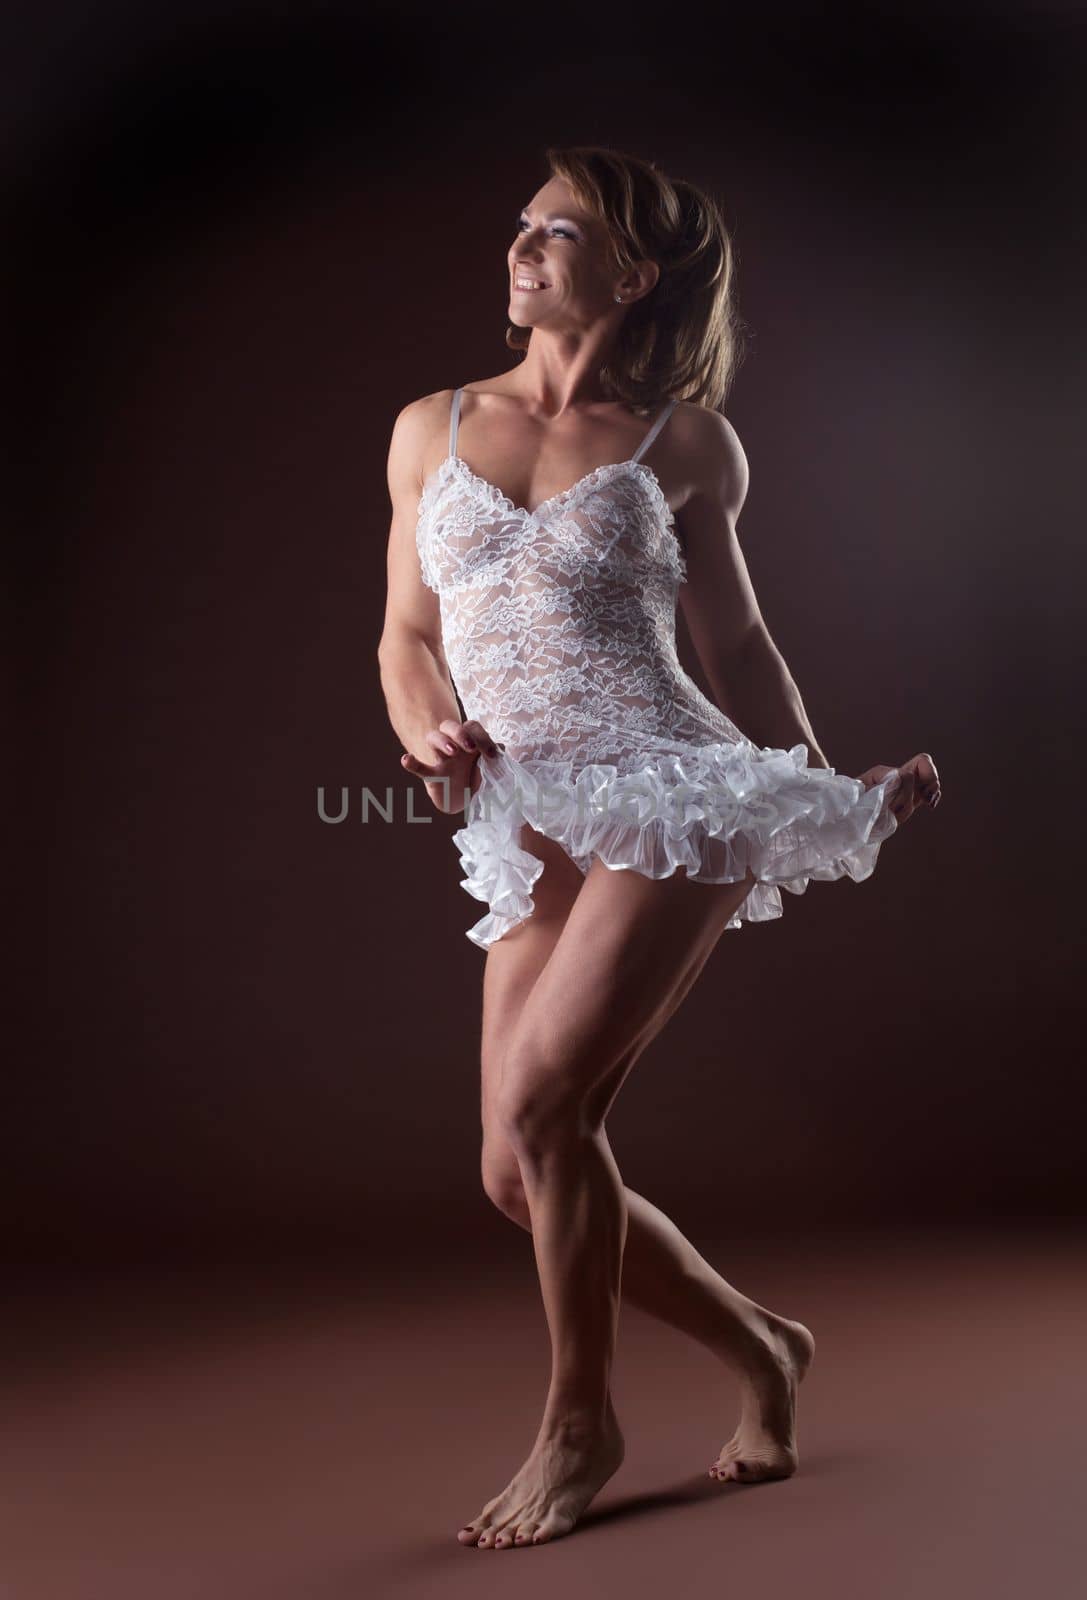 Athletic woman posing in white ballet cloth by rivertime